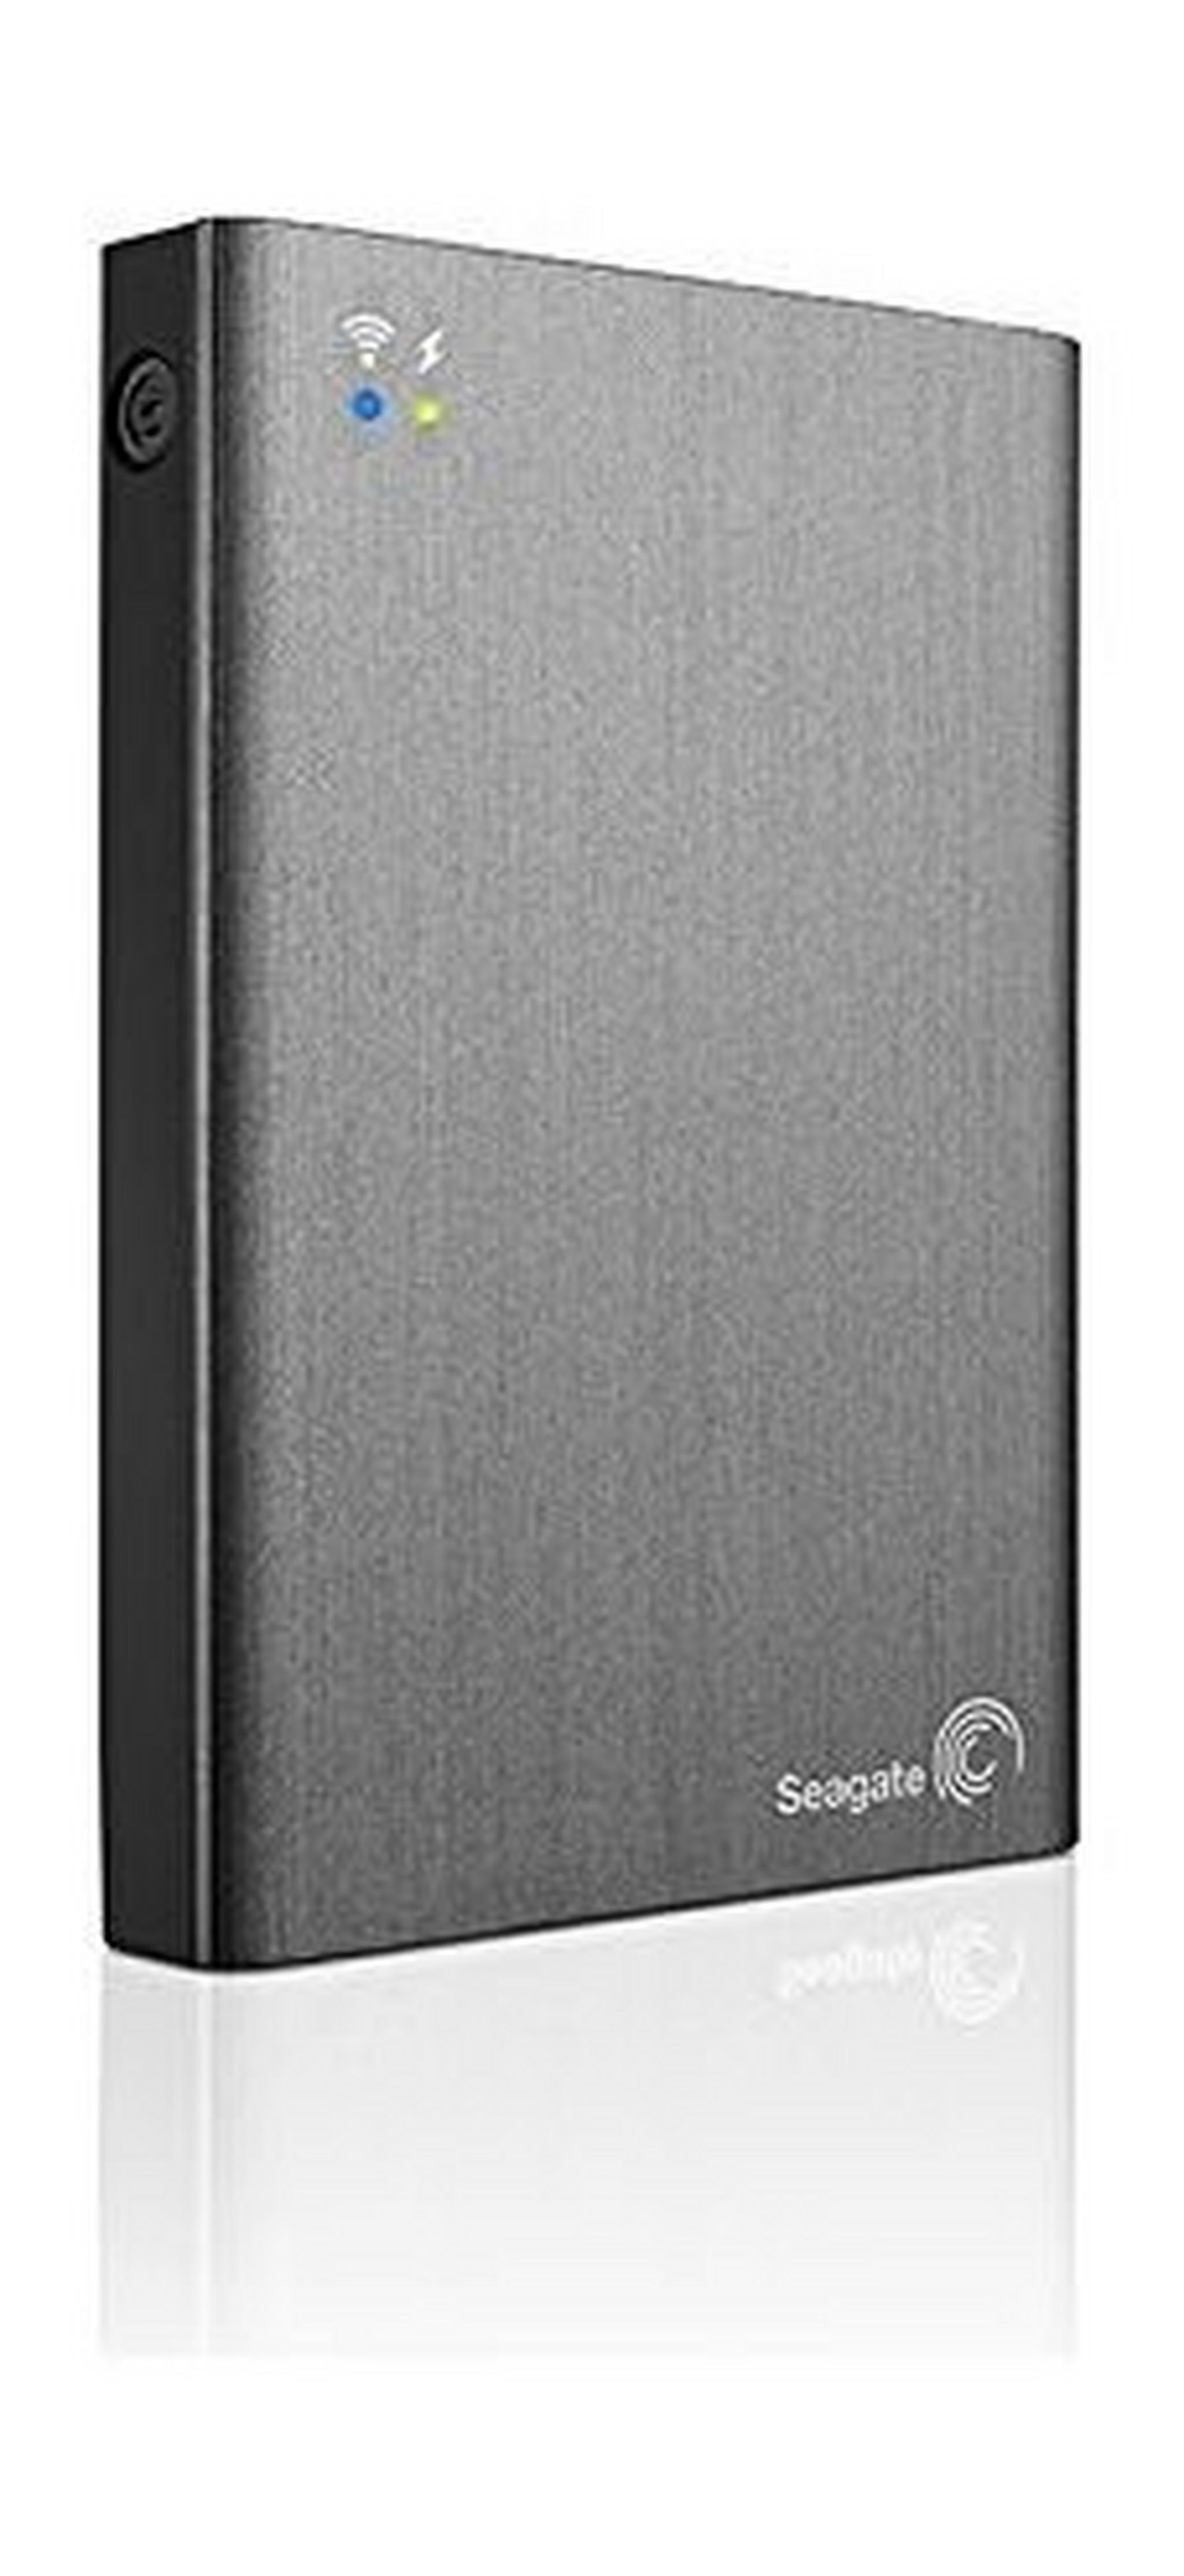 Seagate 2TB Wireless Plus Portable Hard Disk with Built-in Wi-Fi - STCV2000200